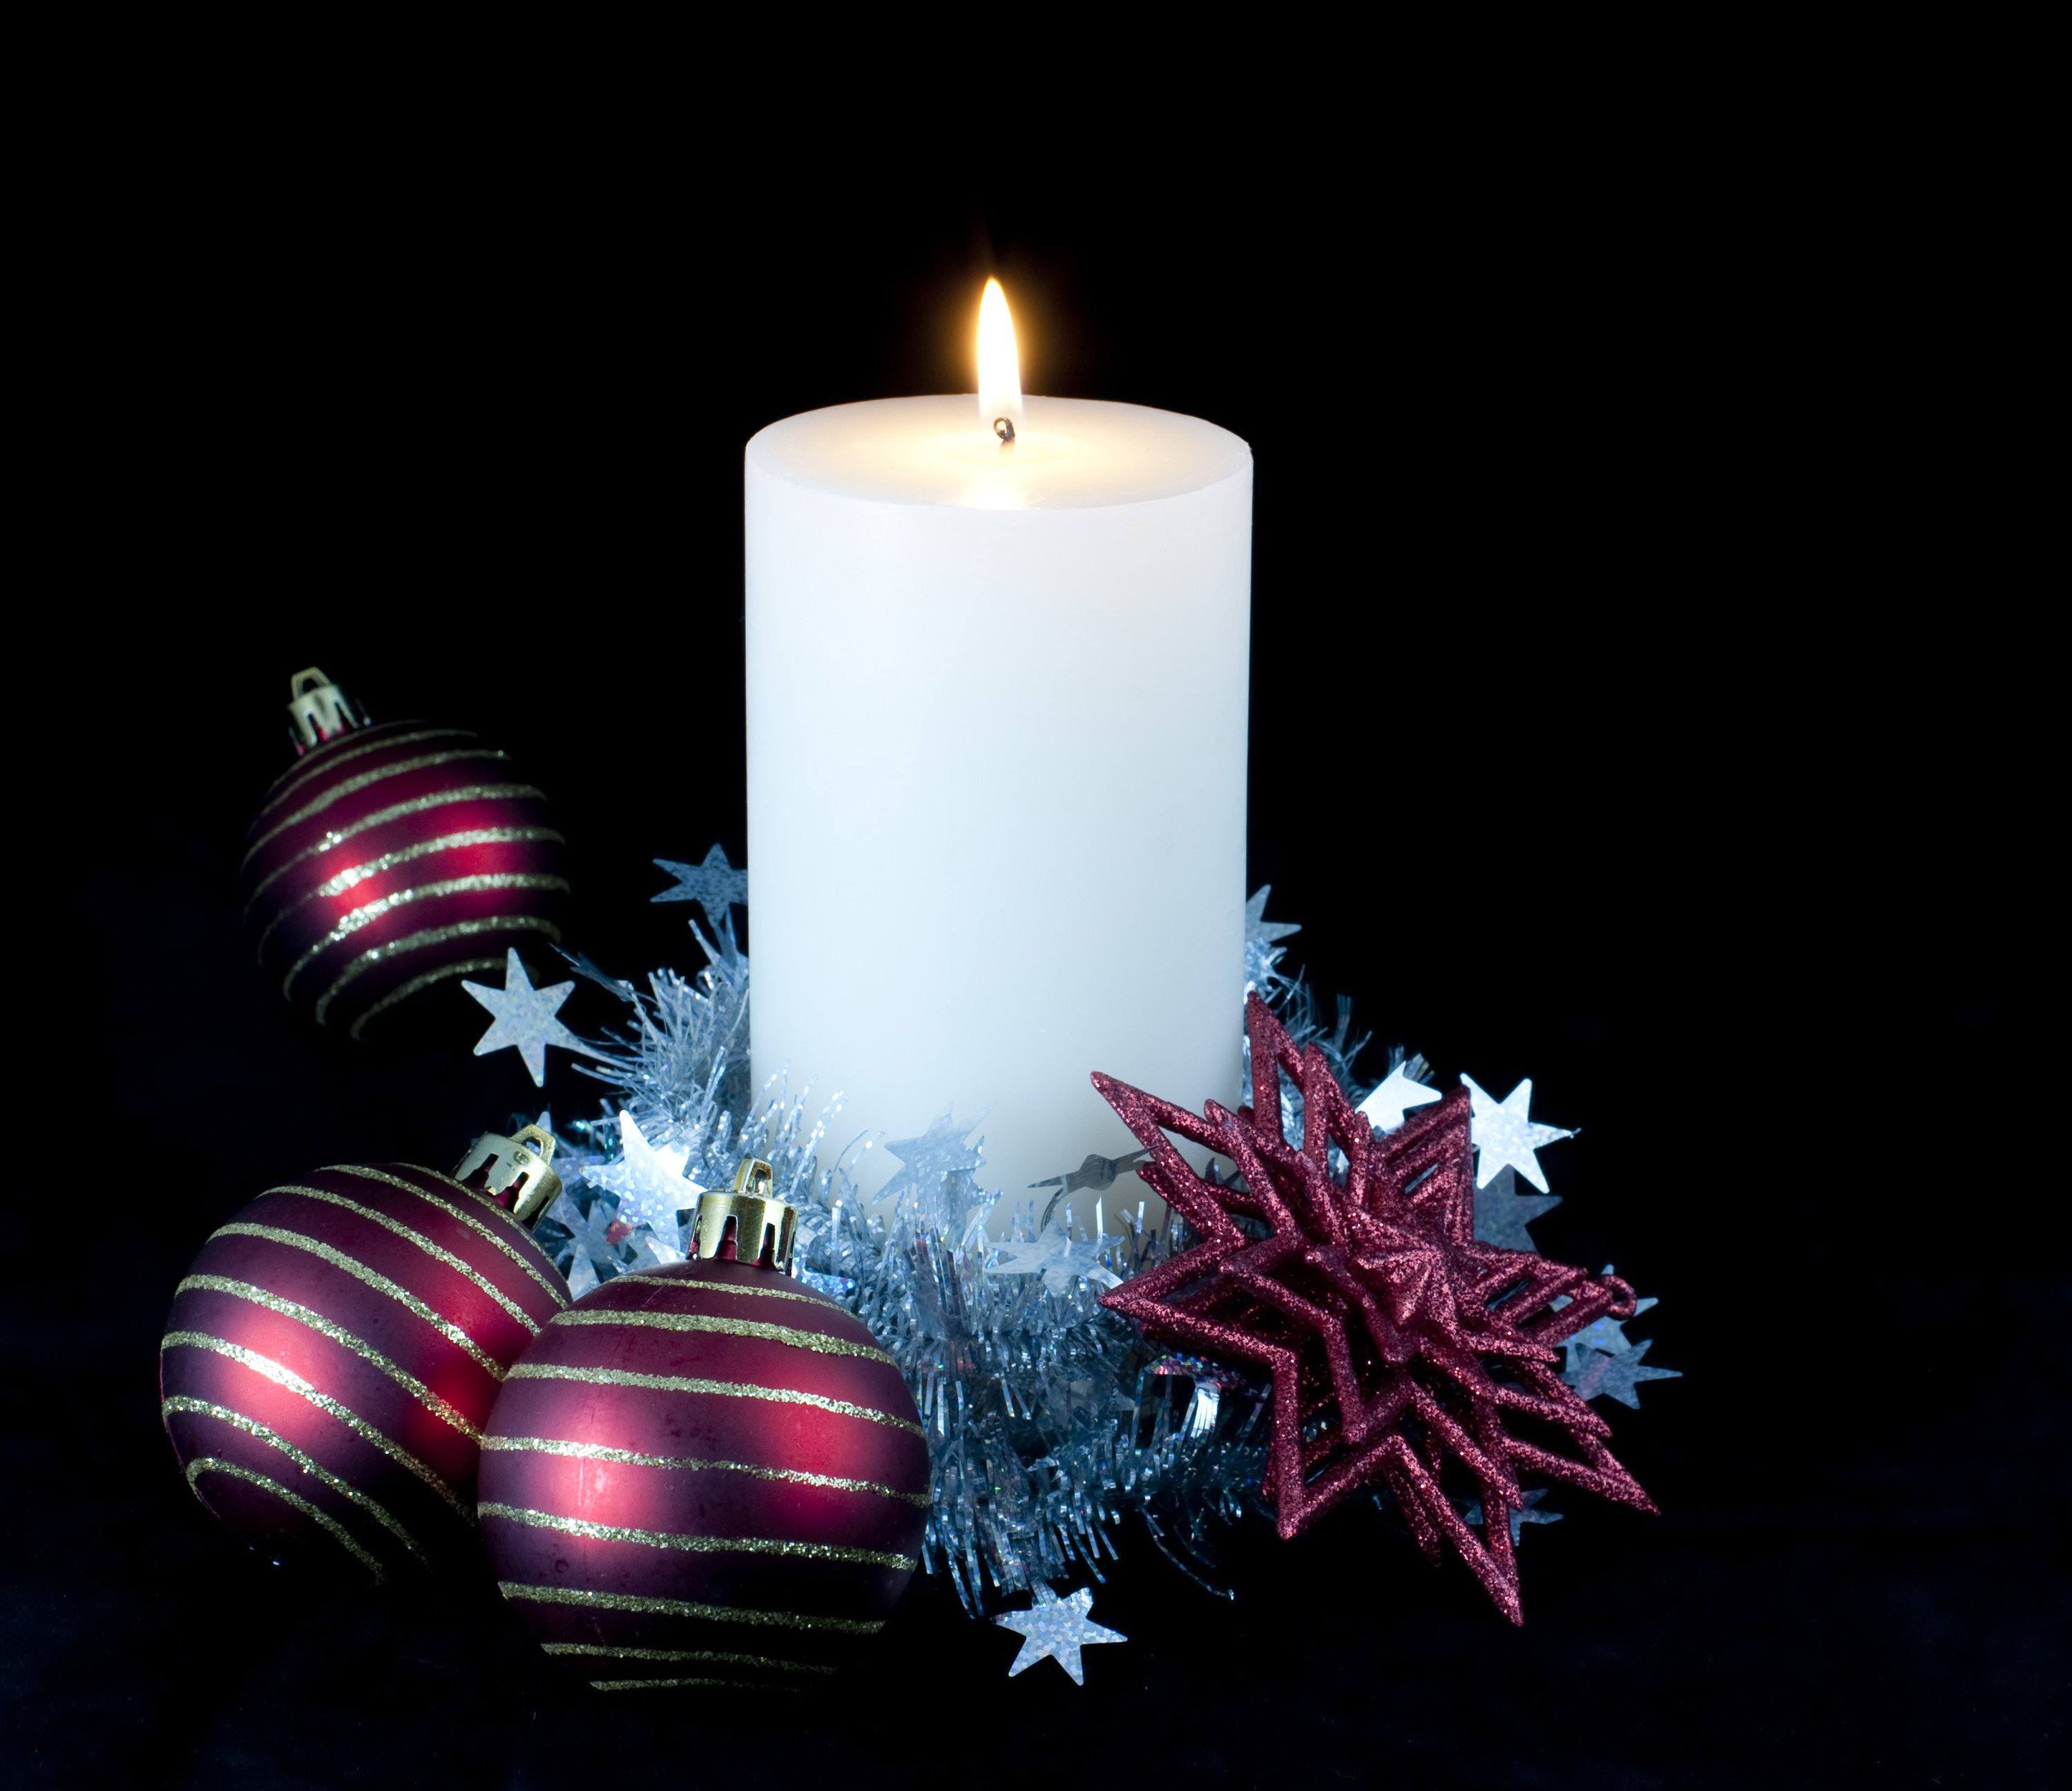 Free Stock Photo 3597-festive decorated candle | freeimageslive